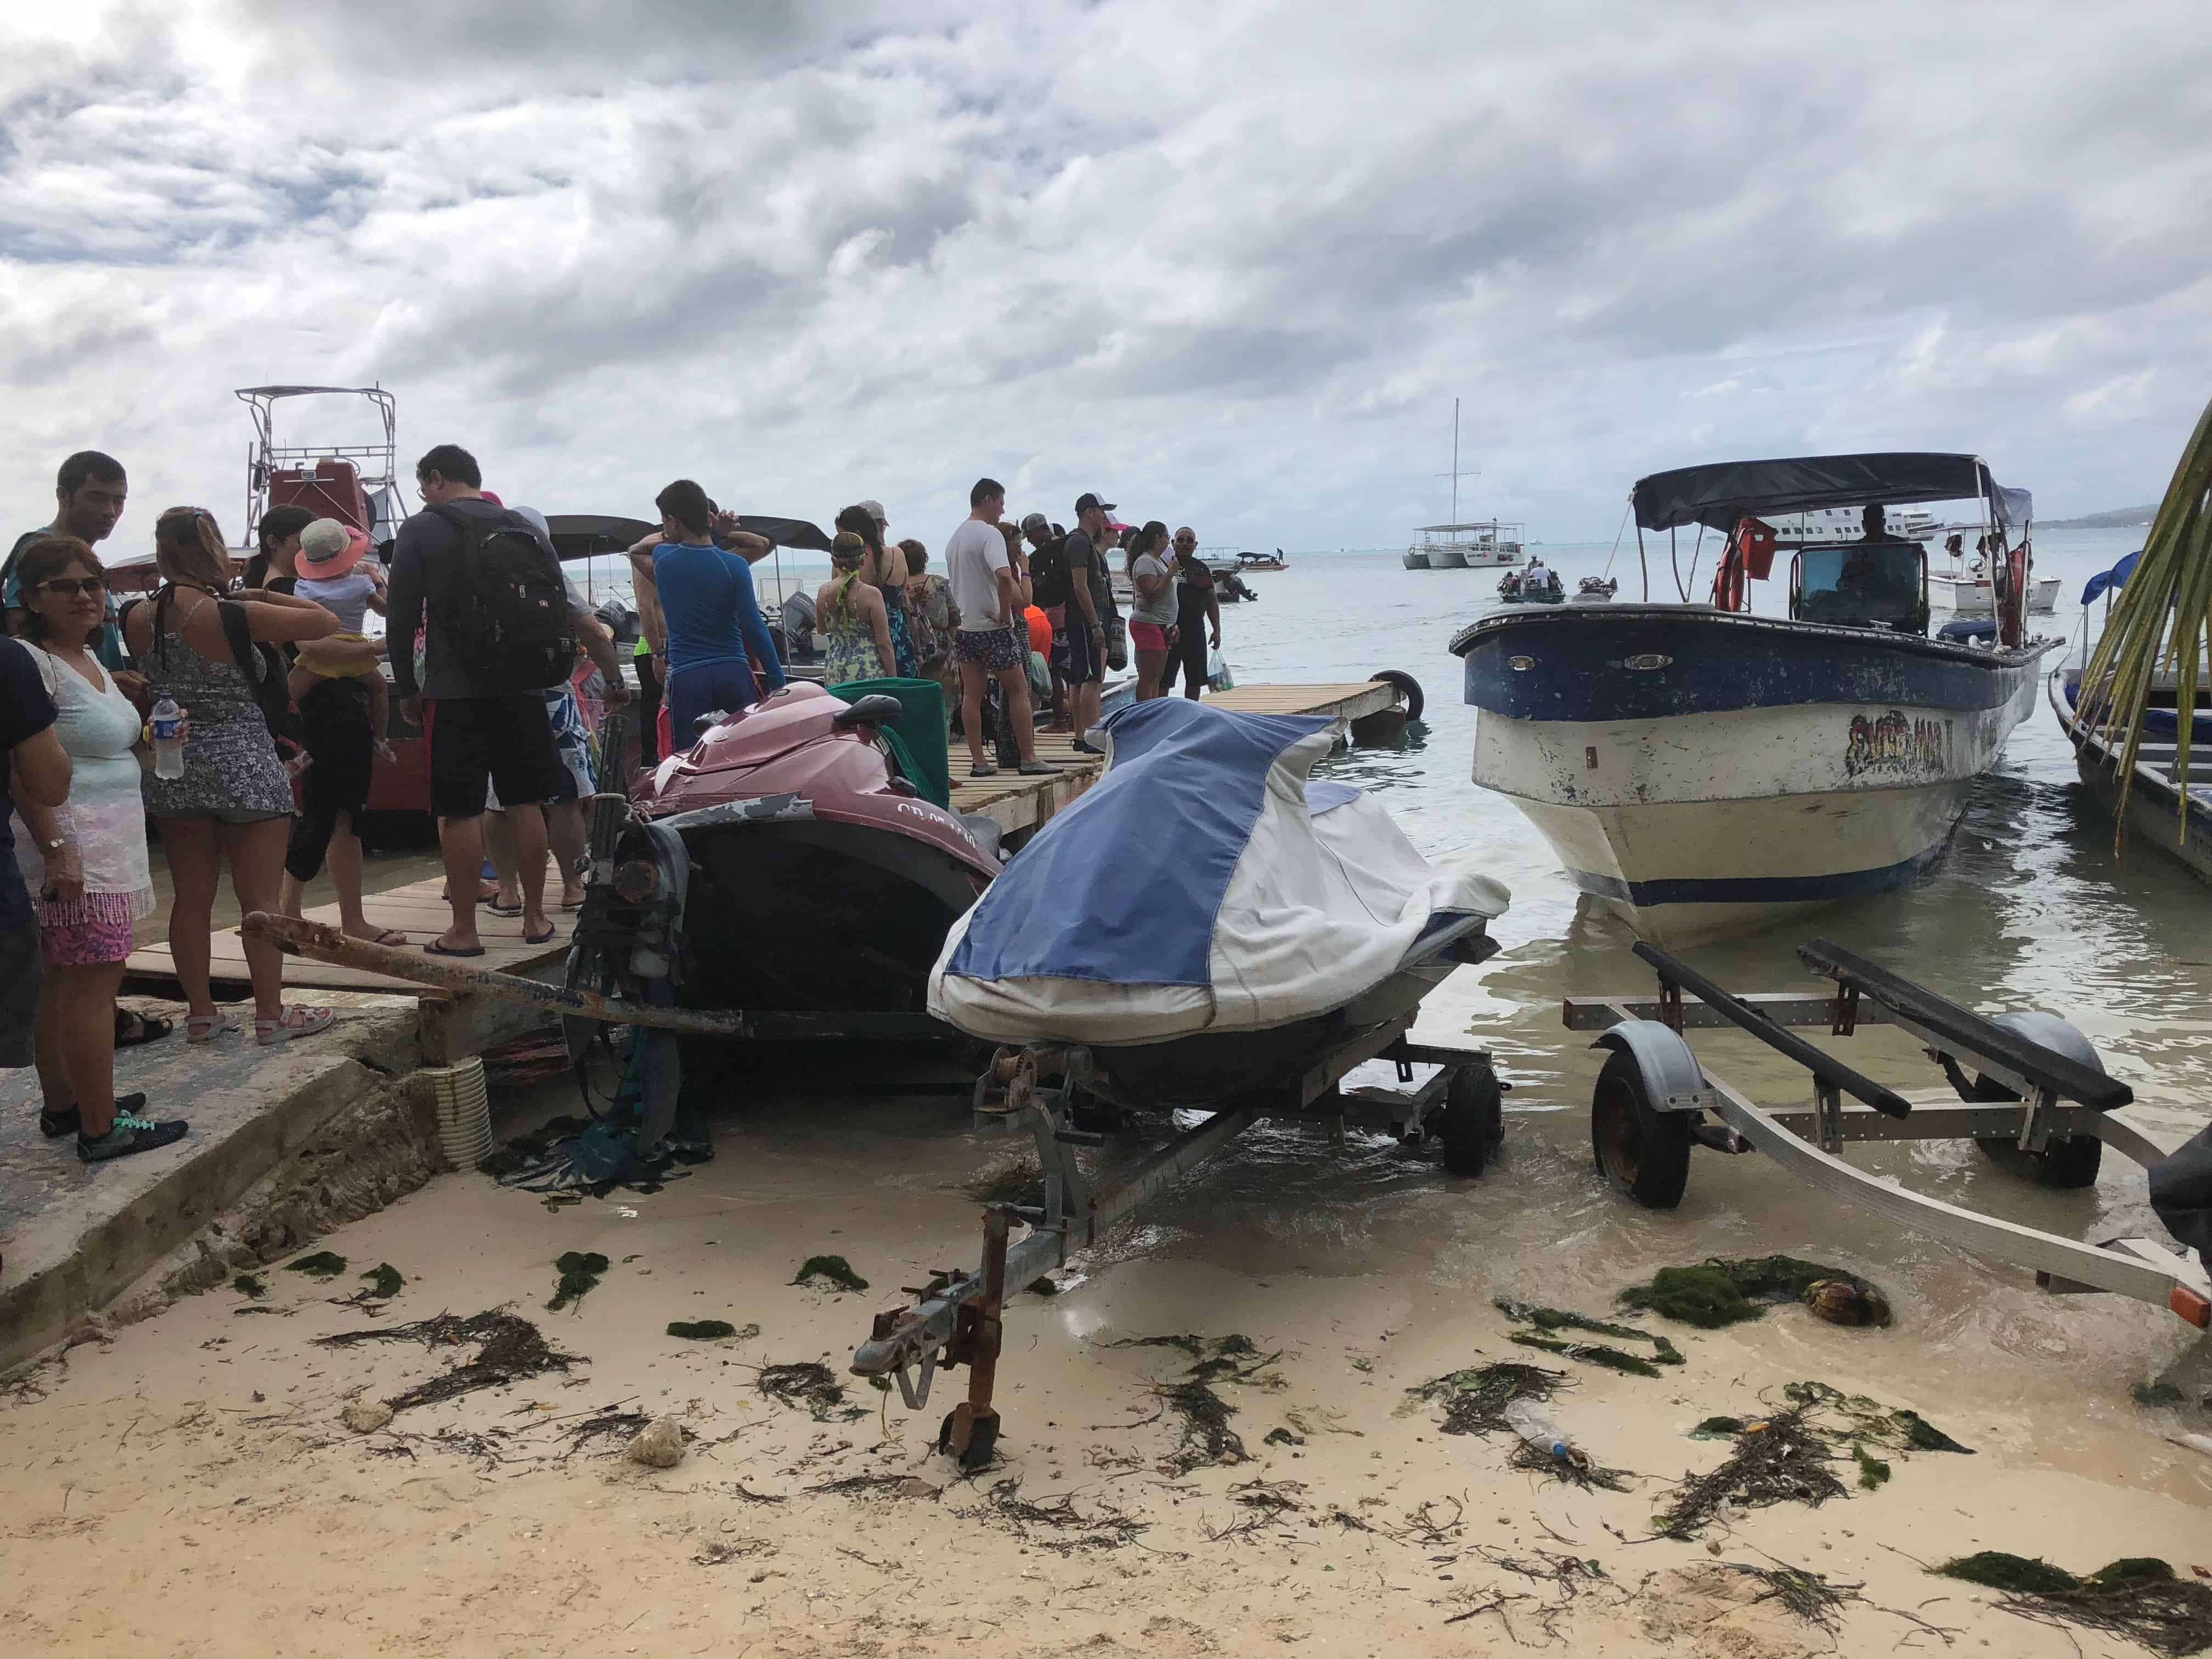 Getting on the boat in San Andrés, Colombia